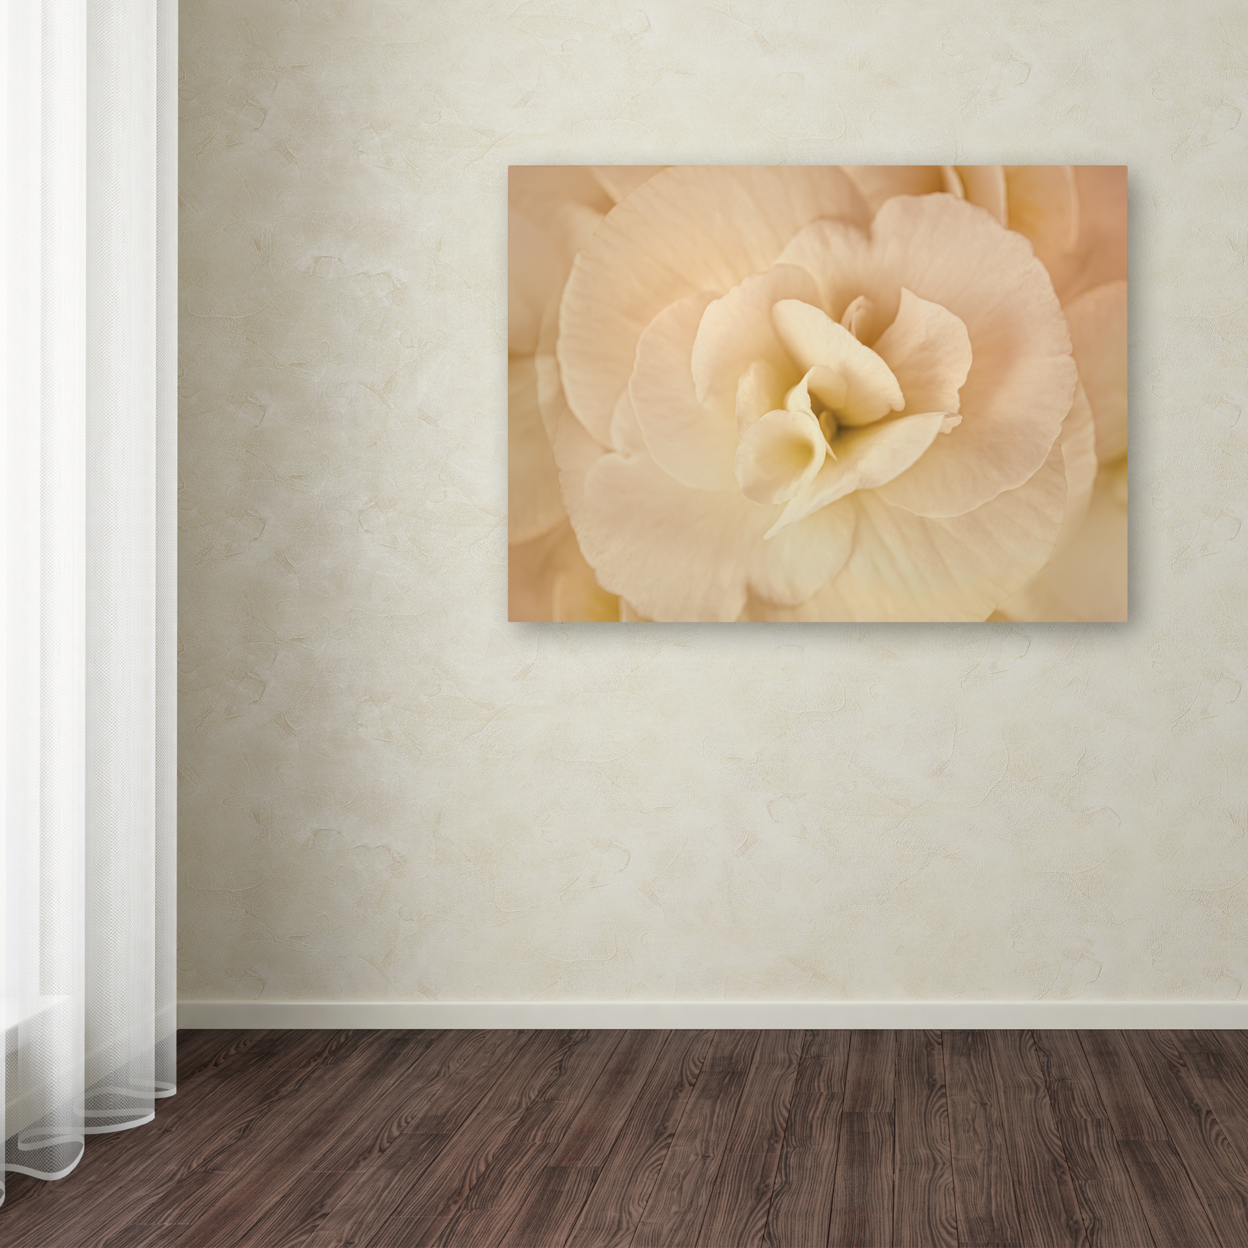 Cora Niele 'Amber Begonia Flower' Canvas Wall Art 35 X 47 Inches